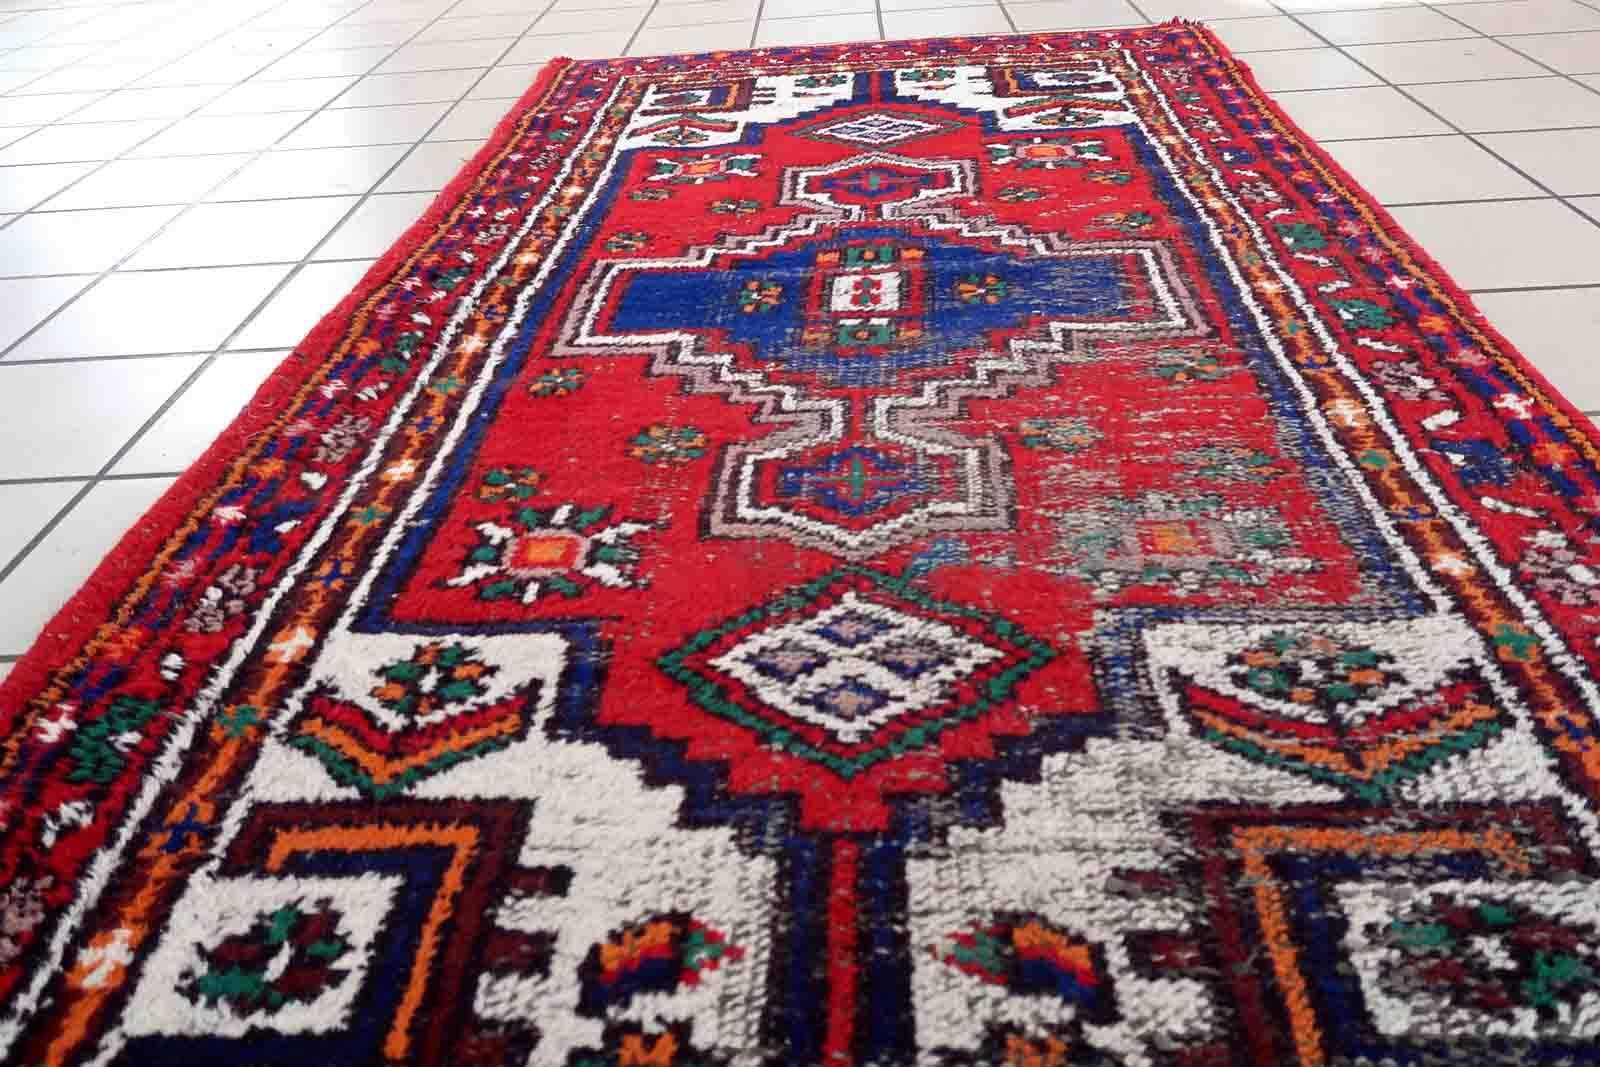 Handmade vintage Hamadan rug in bright colors. The rug is from the end of 20th century in distressed condition.

-condition: distressed,

-circa: 1970s,

-size: 3' x 6' (93cm x 183cm),

-material: wool,

-country of origin: Middle